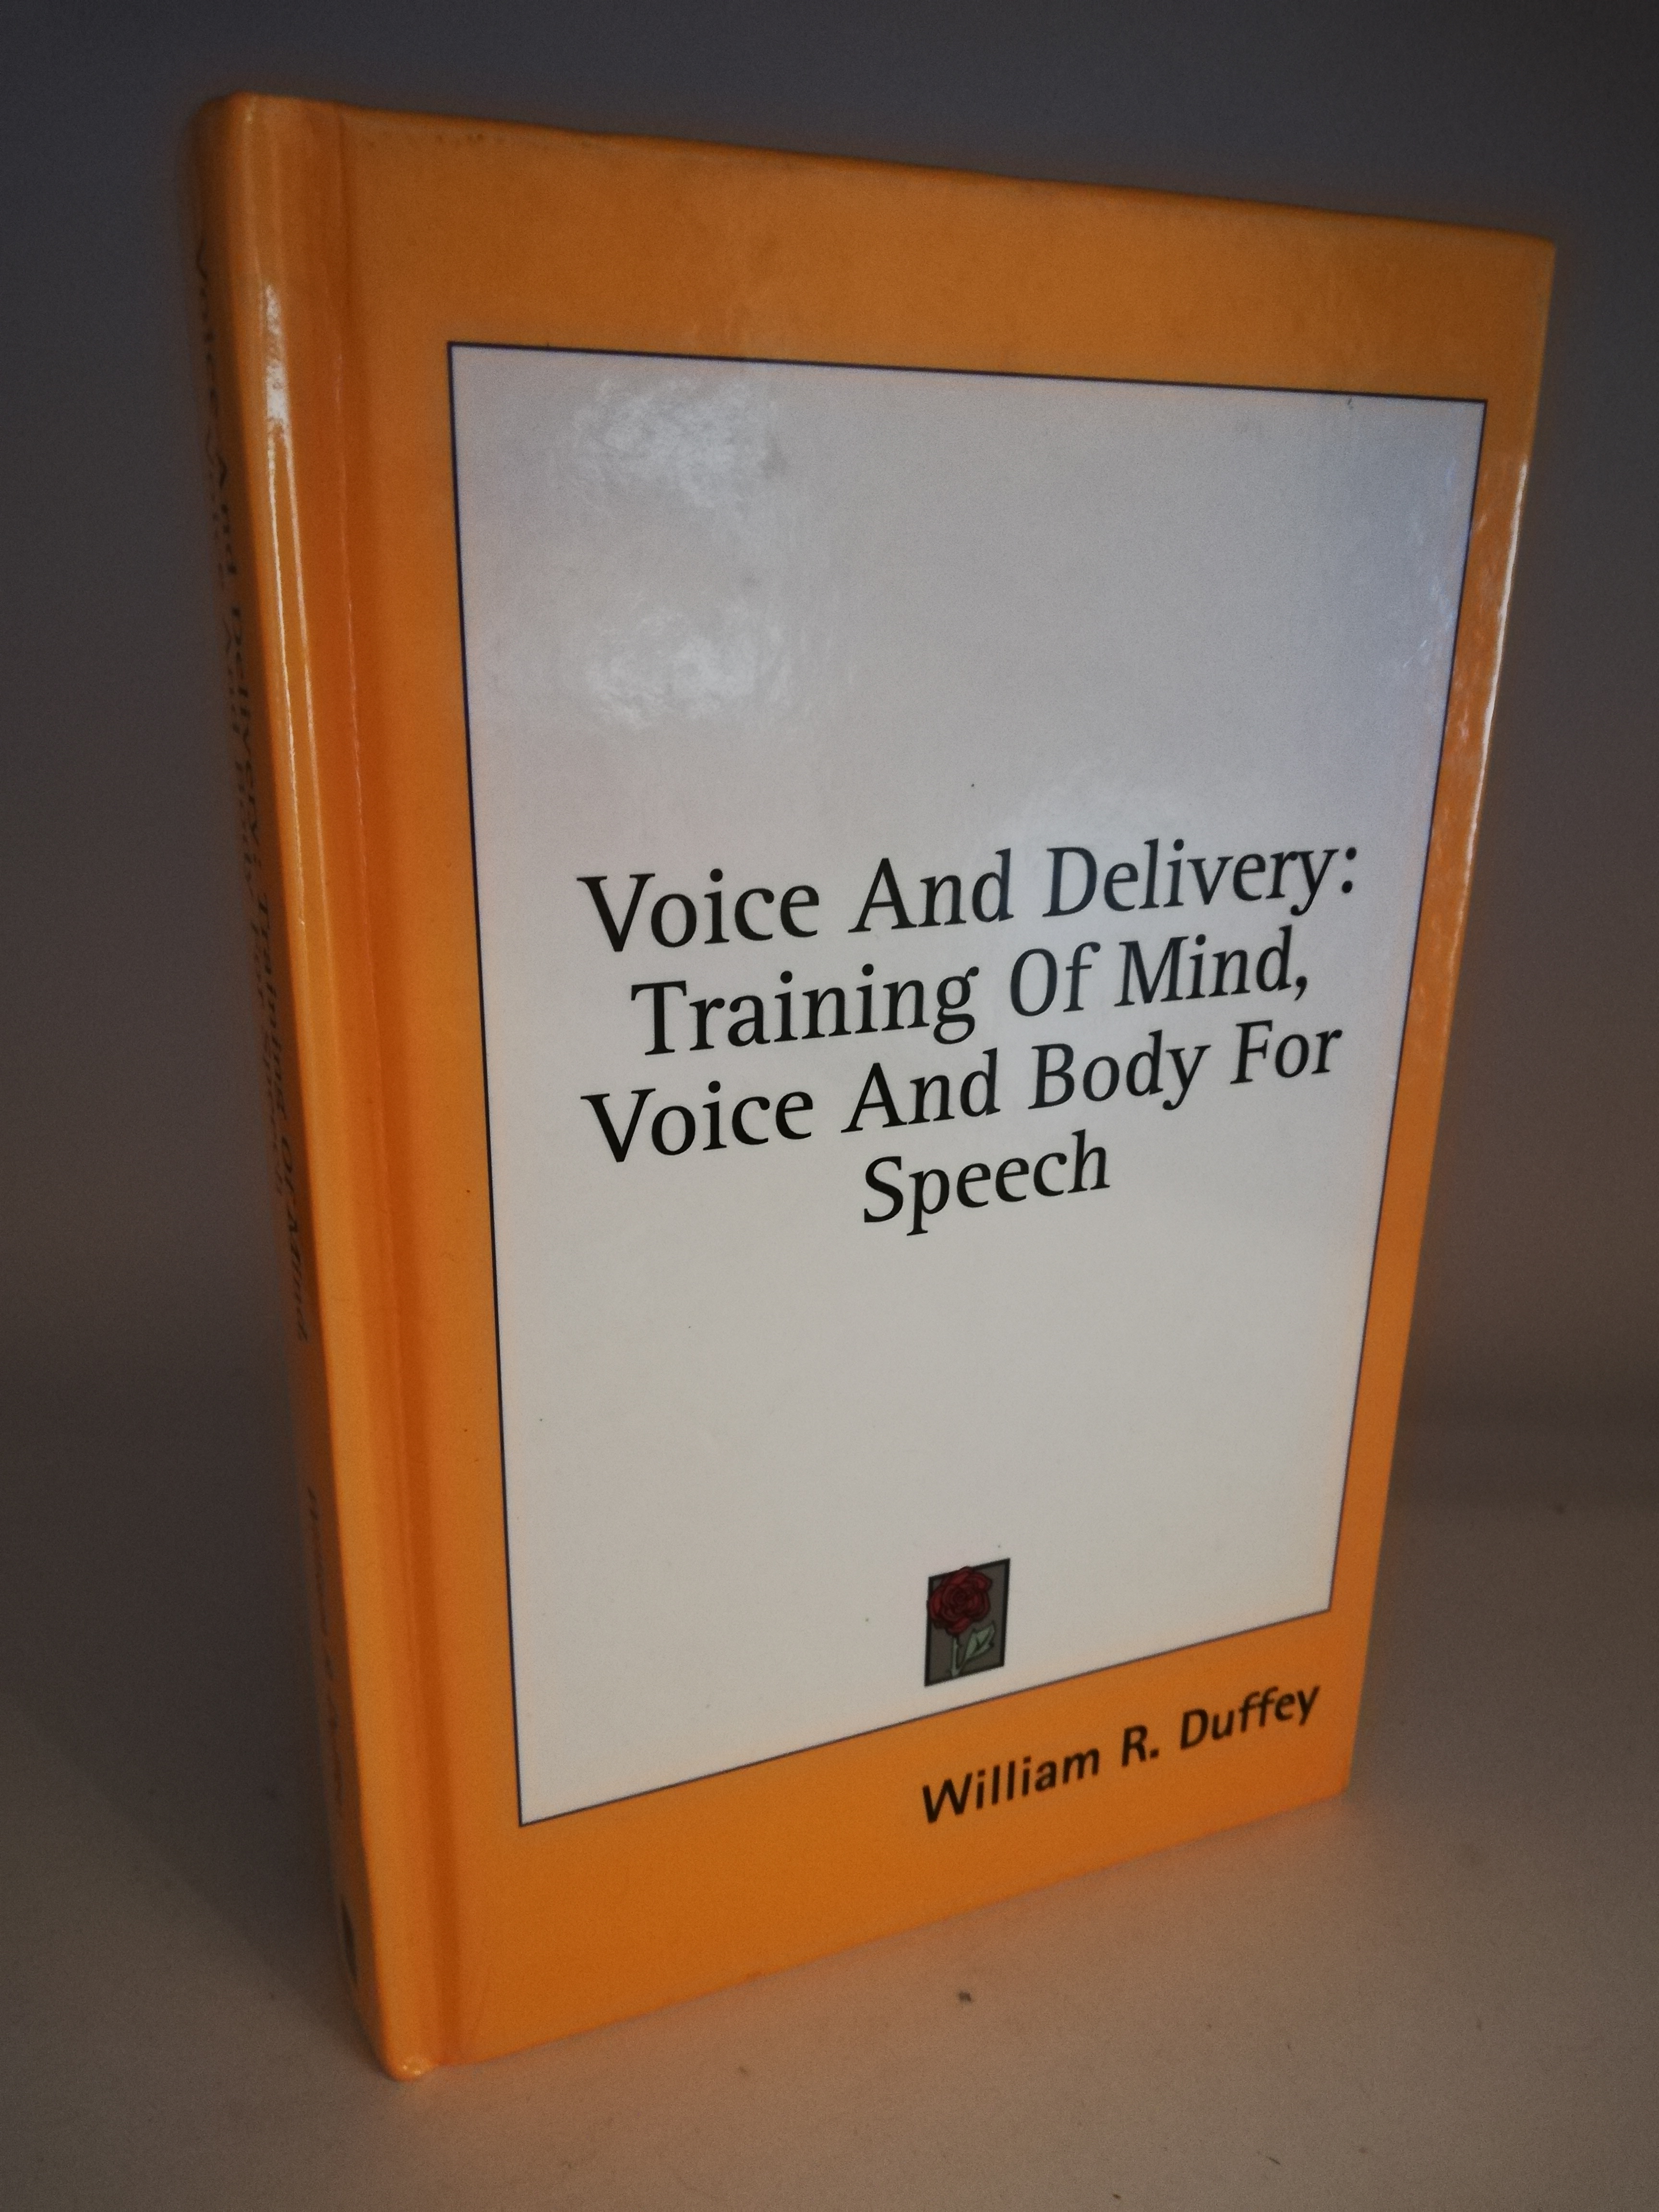 William Duffey  Voice And Delivery: Training Of Mind, Voice And Body For Speech 